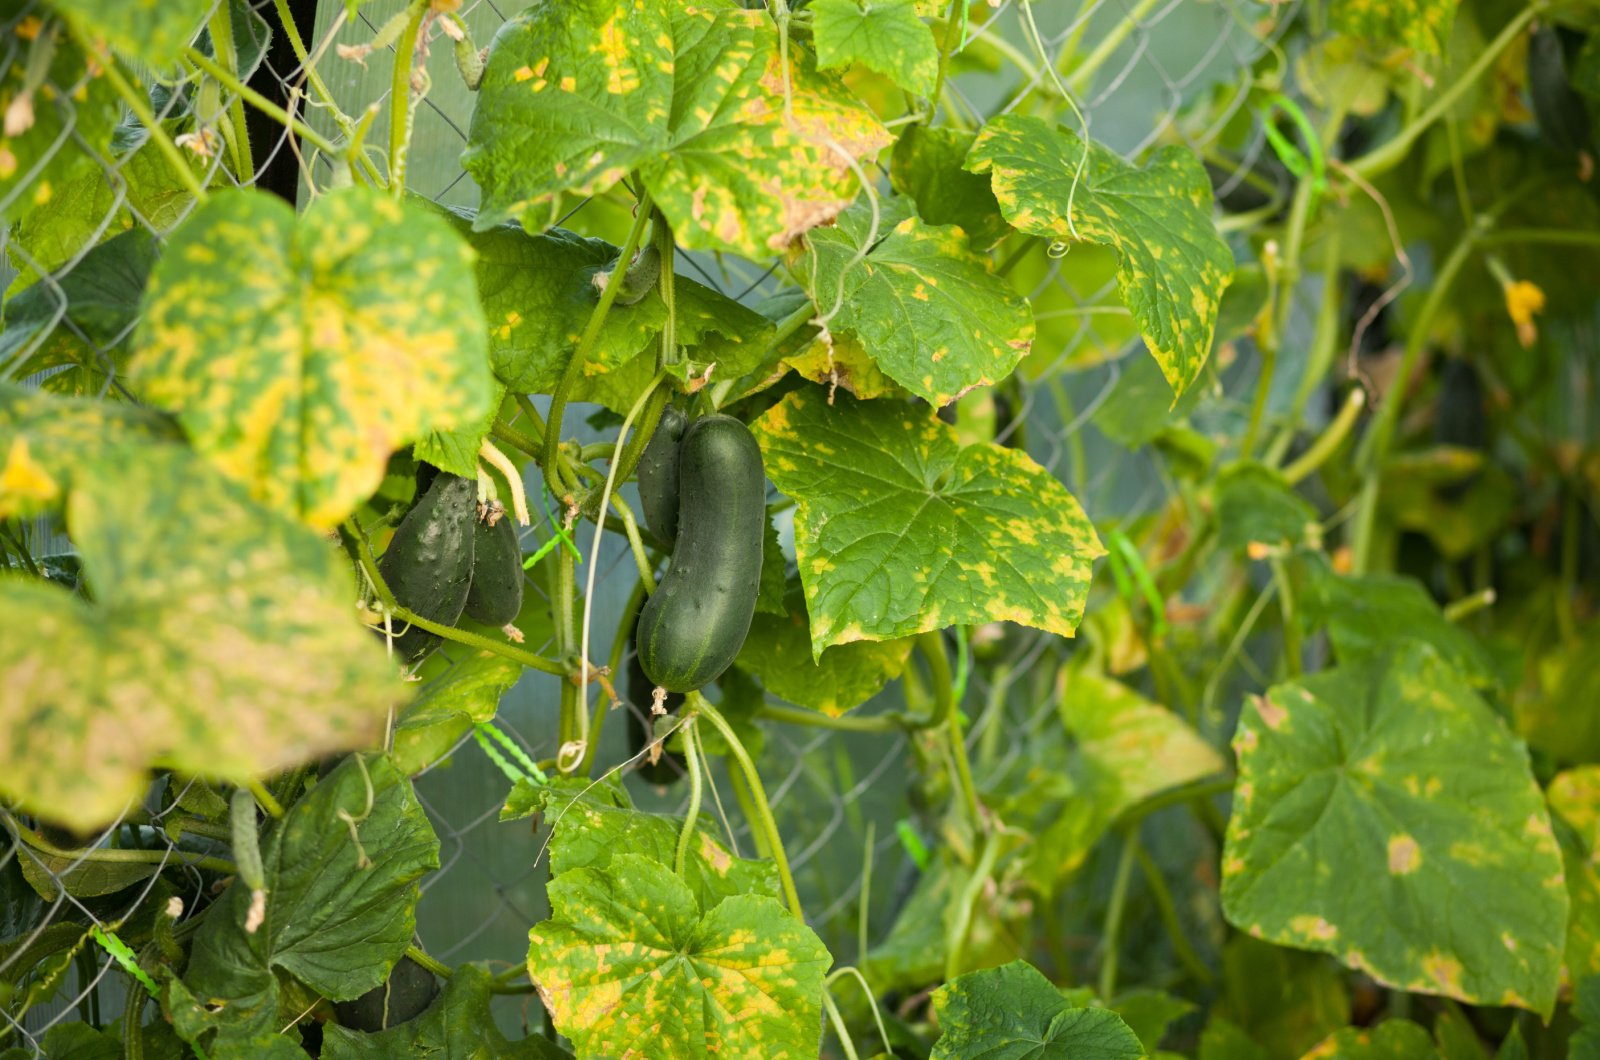 cucumber plant affected by a disease